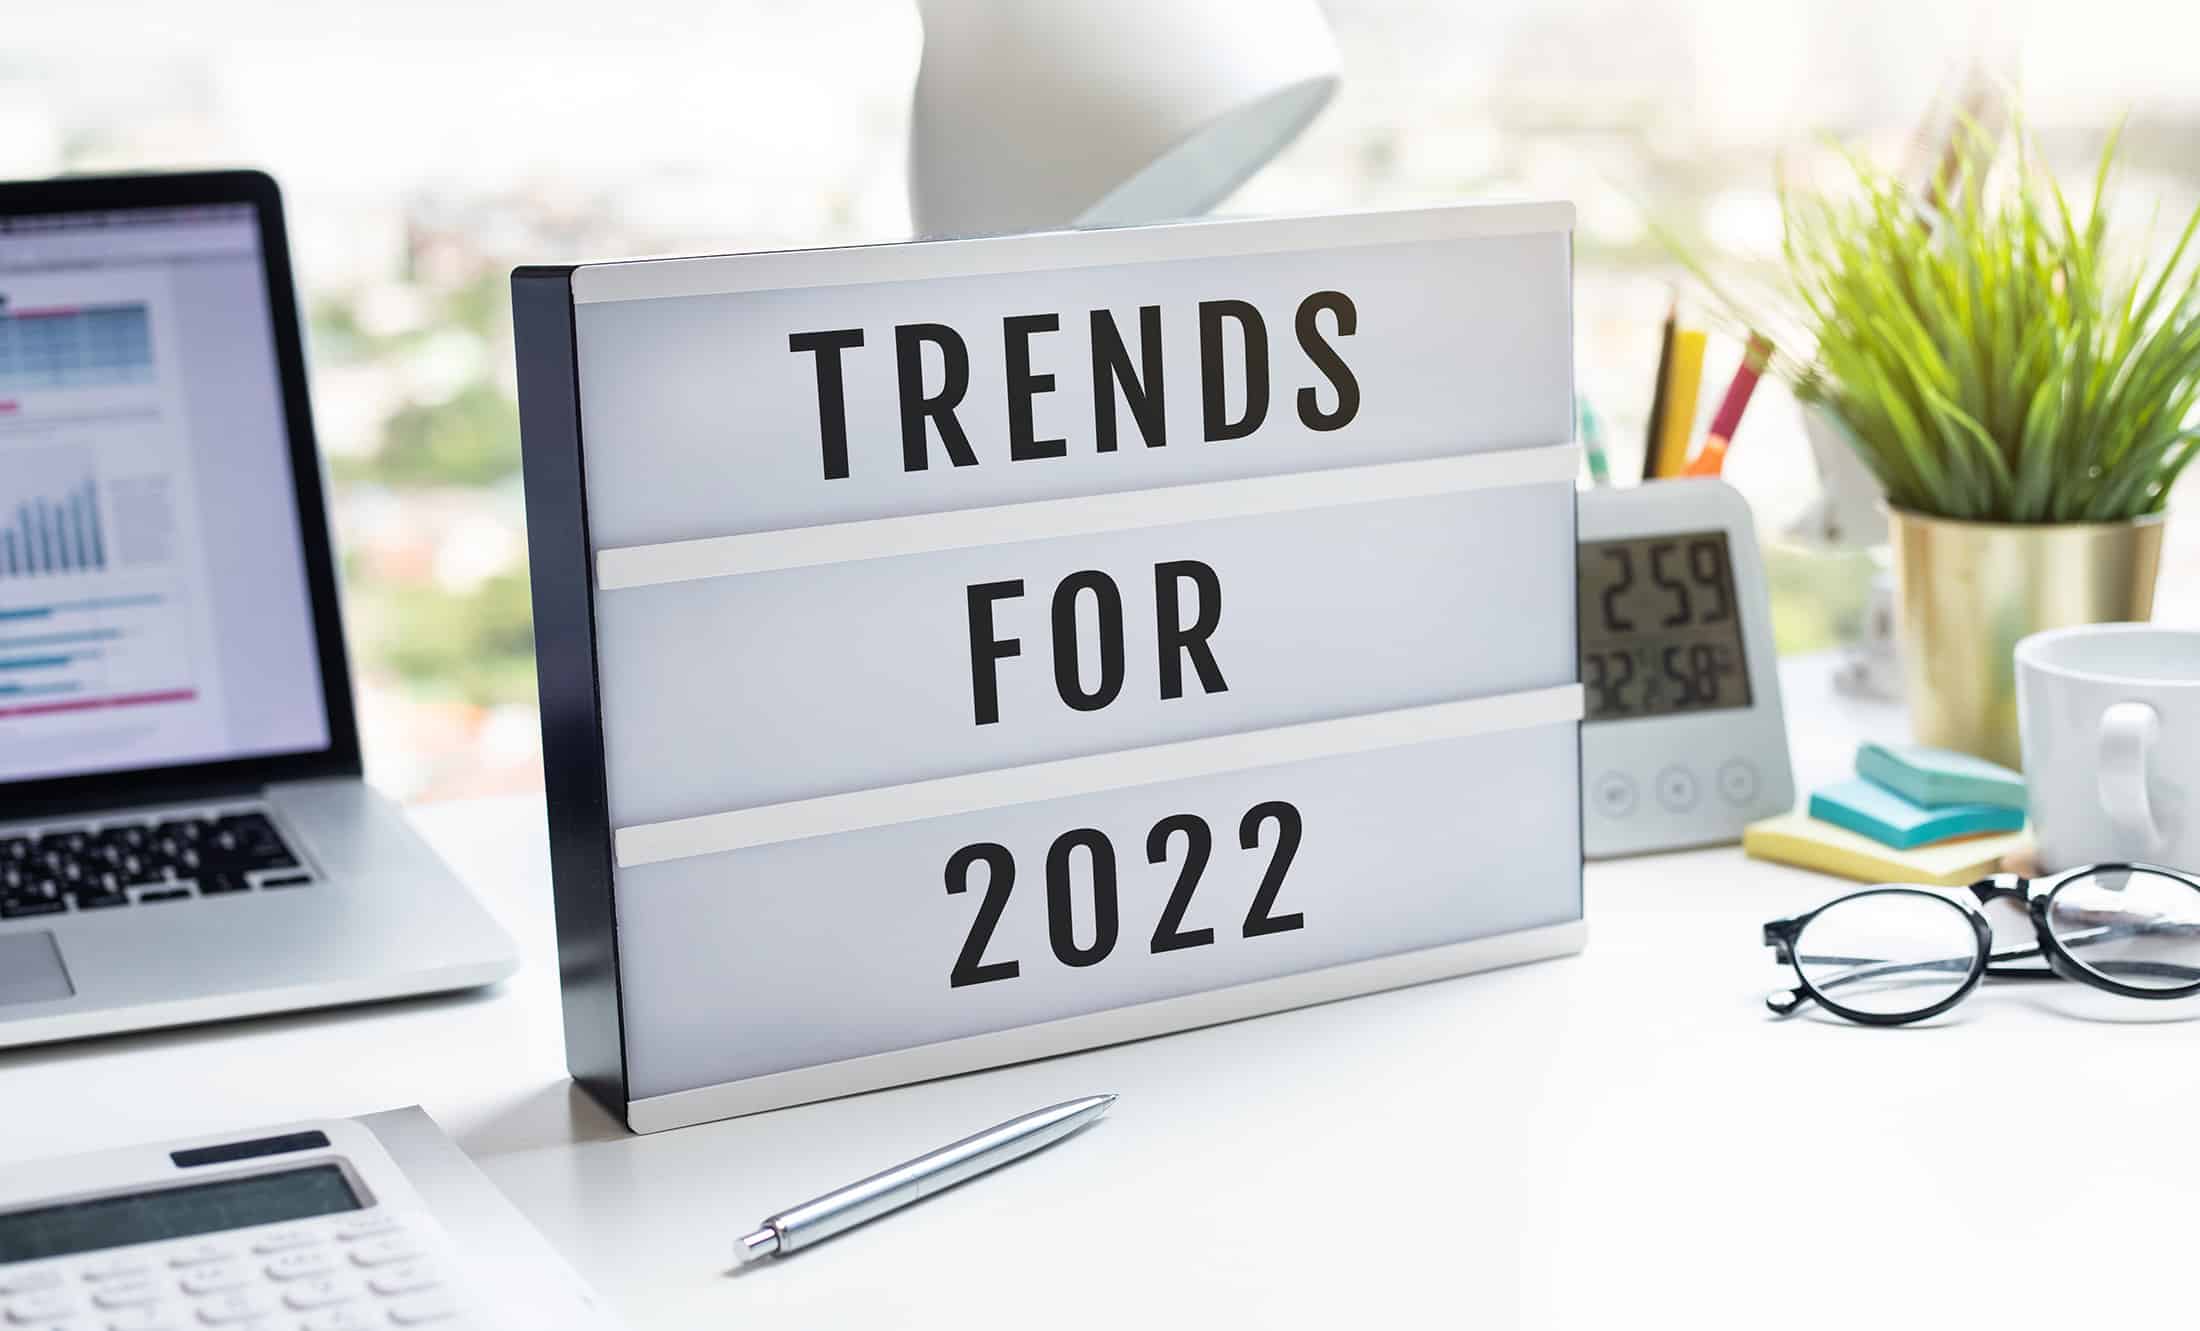 Trends for 2022 concepts with text on lightbox.inspiration and c